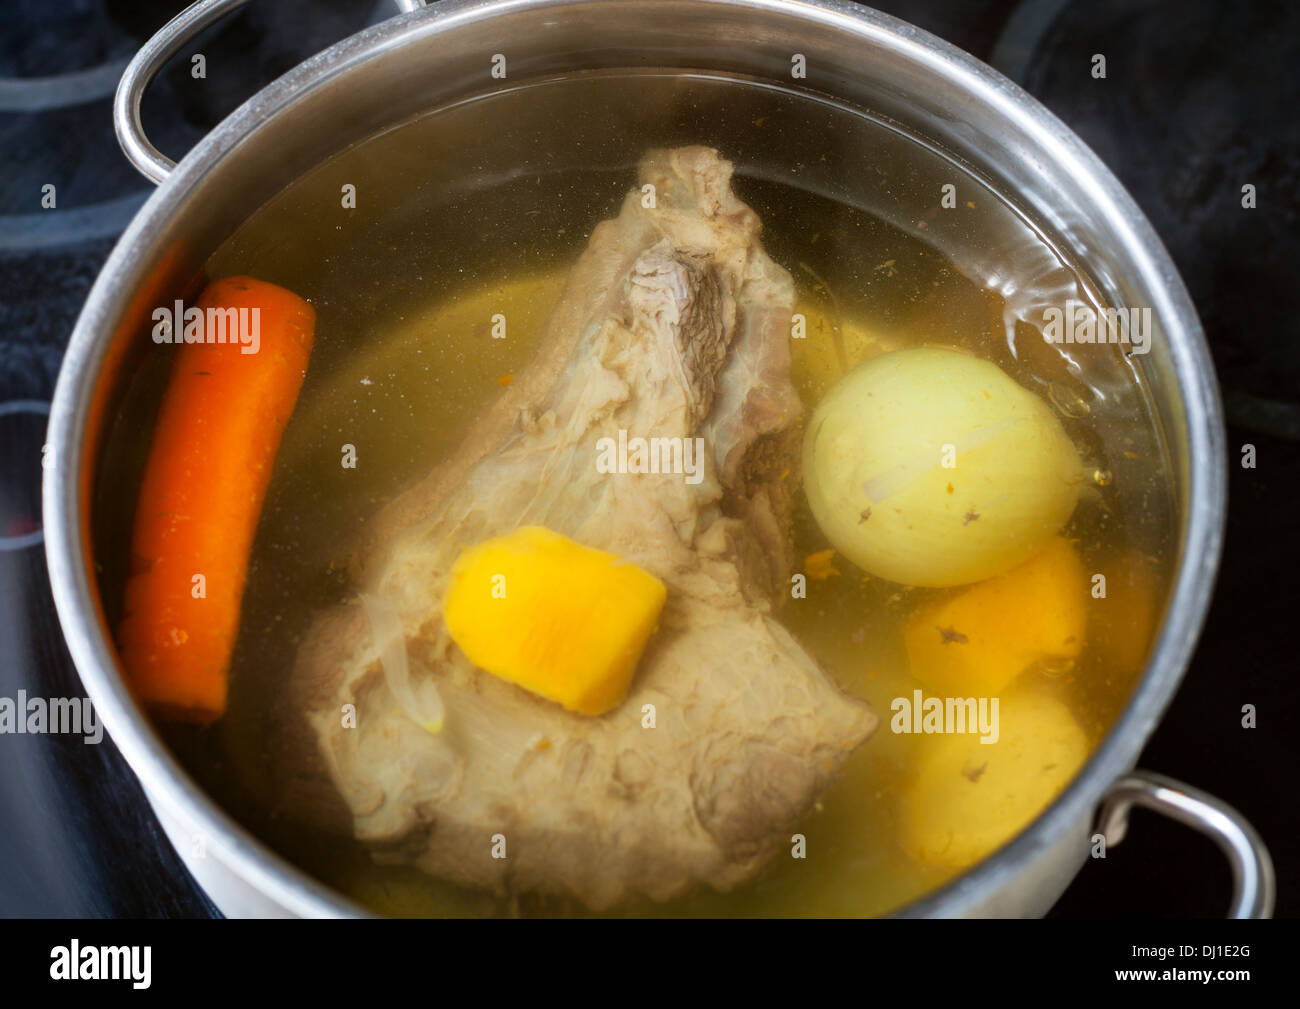 beef broth with seasoning vegetables in open pan on glass ceramic cooker Stock Photo